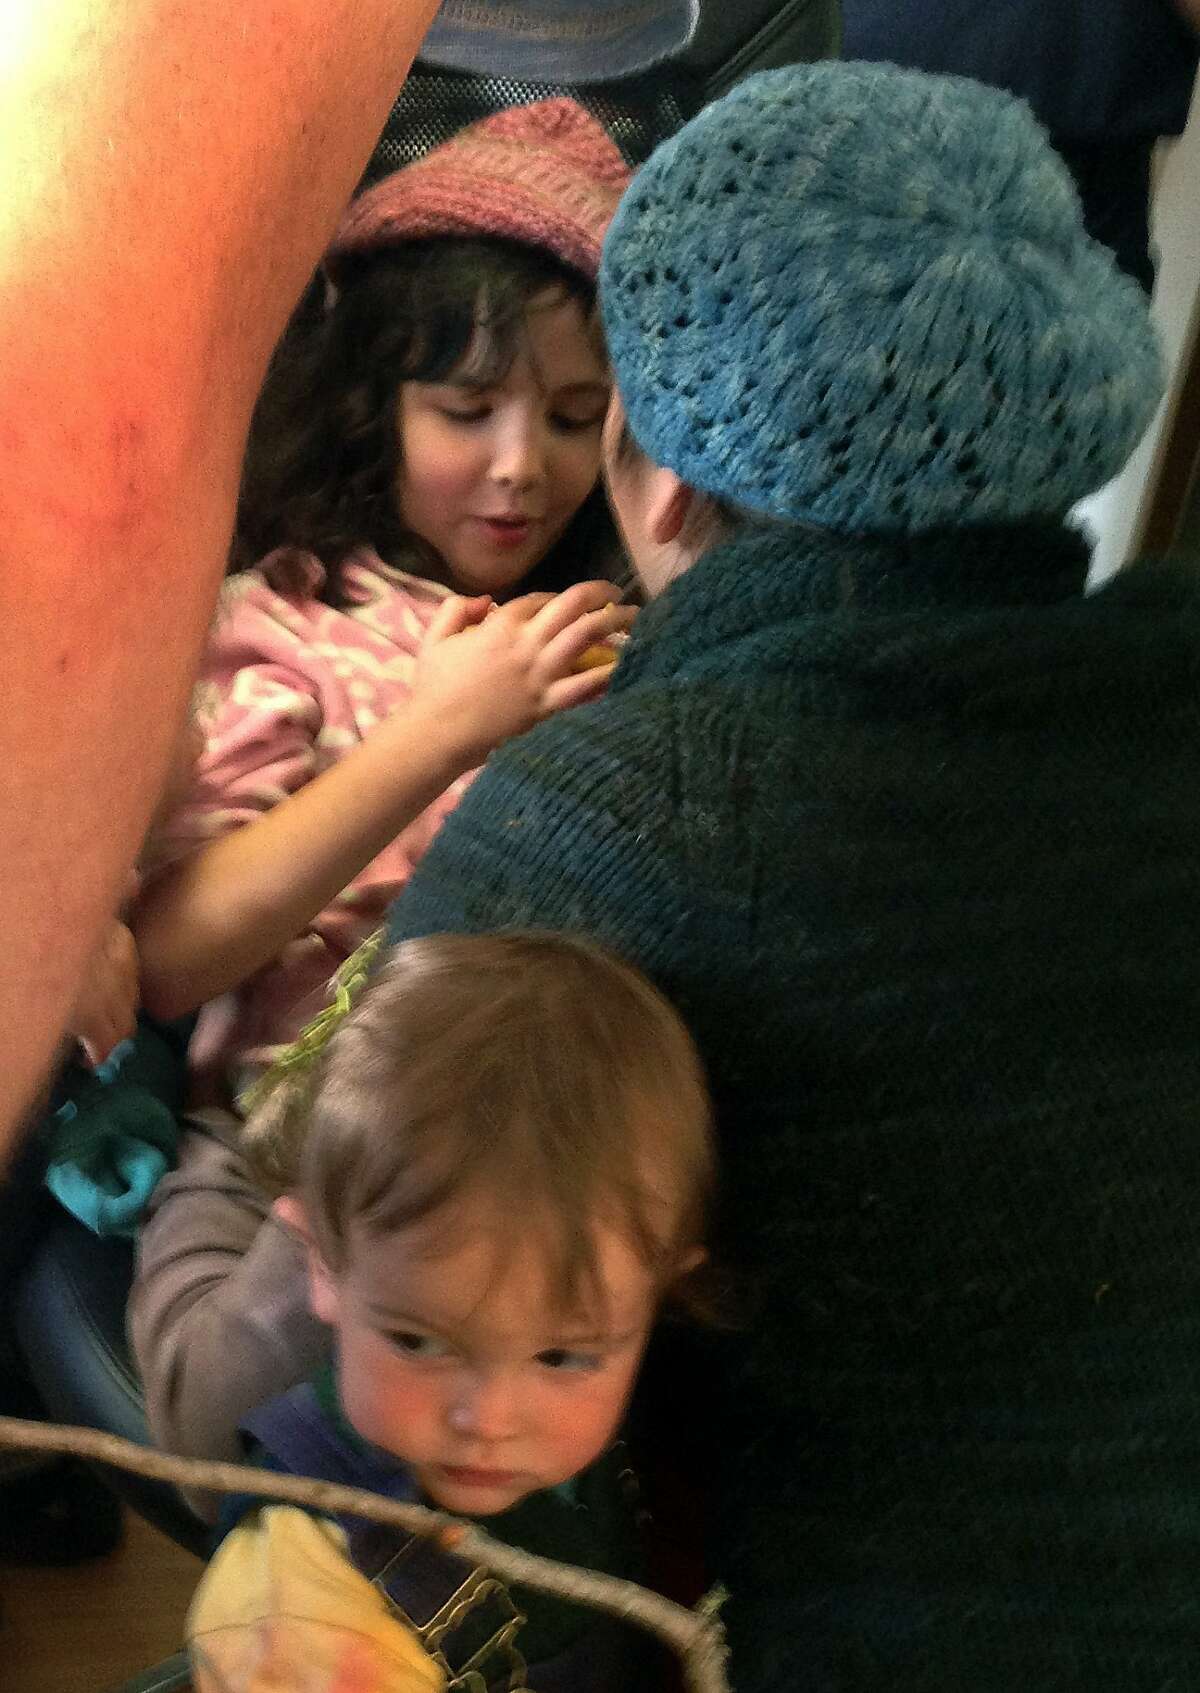 The Marin County Sheriff's Department released this photograph of Ida Rothschild, 9, from Santa Fe, N.M., as she's reunited with her mother Brenna (right) and two-year-old brother (bottom), after becoming separated from the family's campsite at Samuel P. Taylor State Park in Marin County.